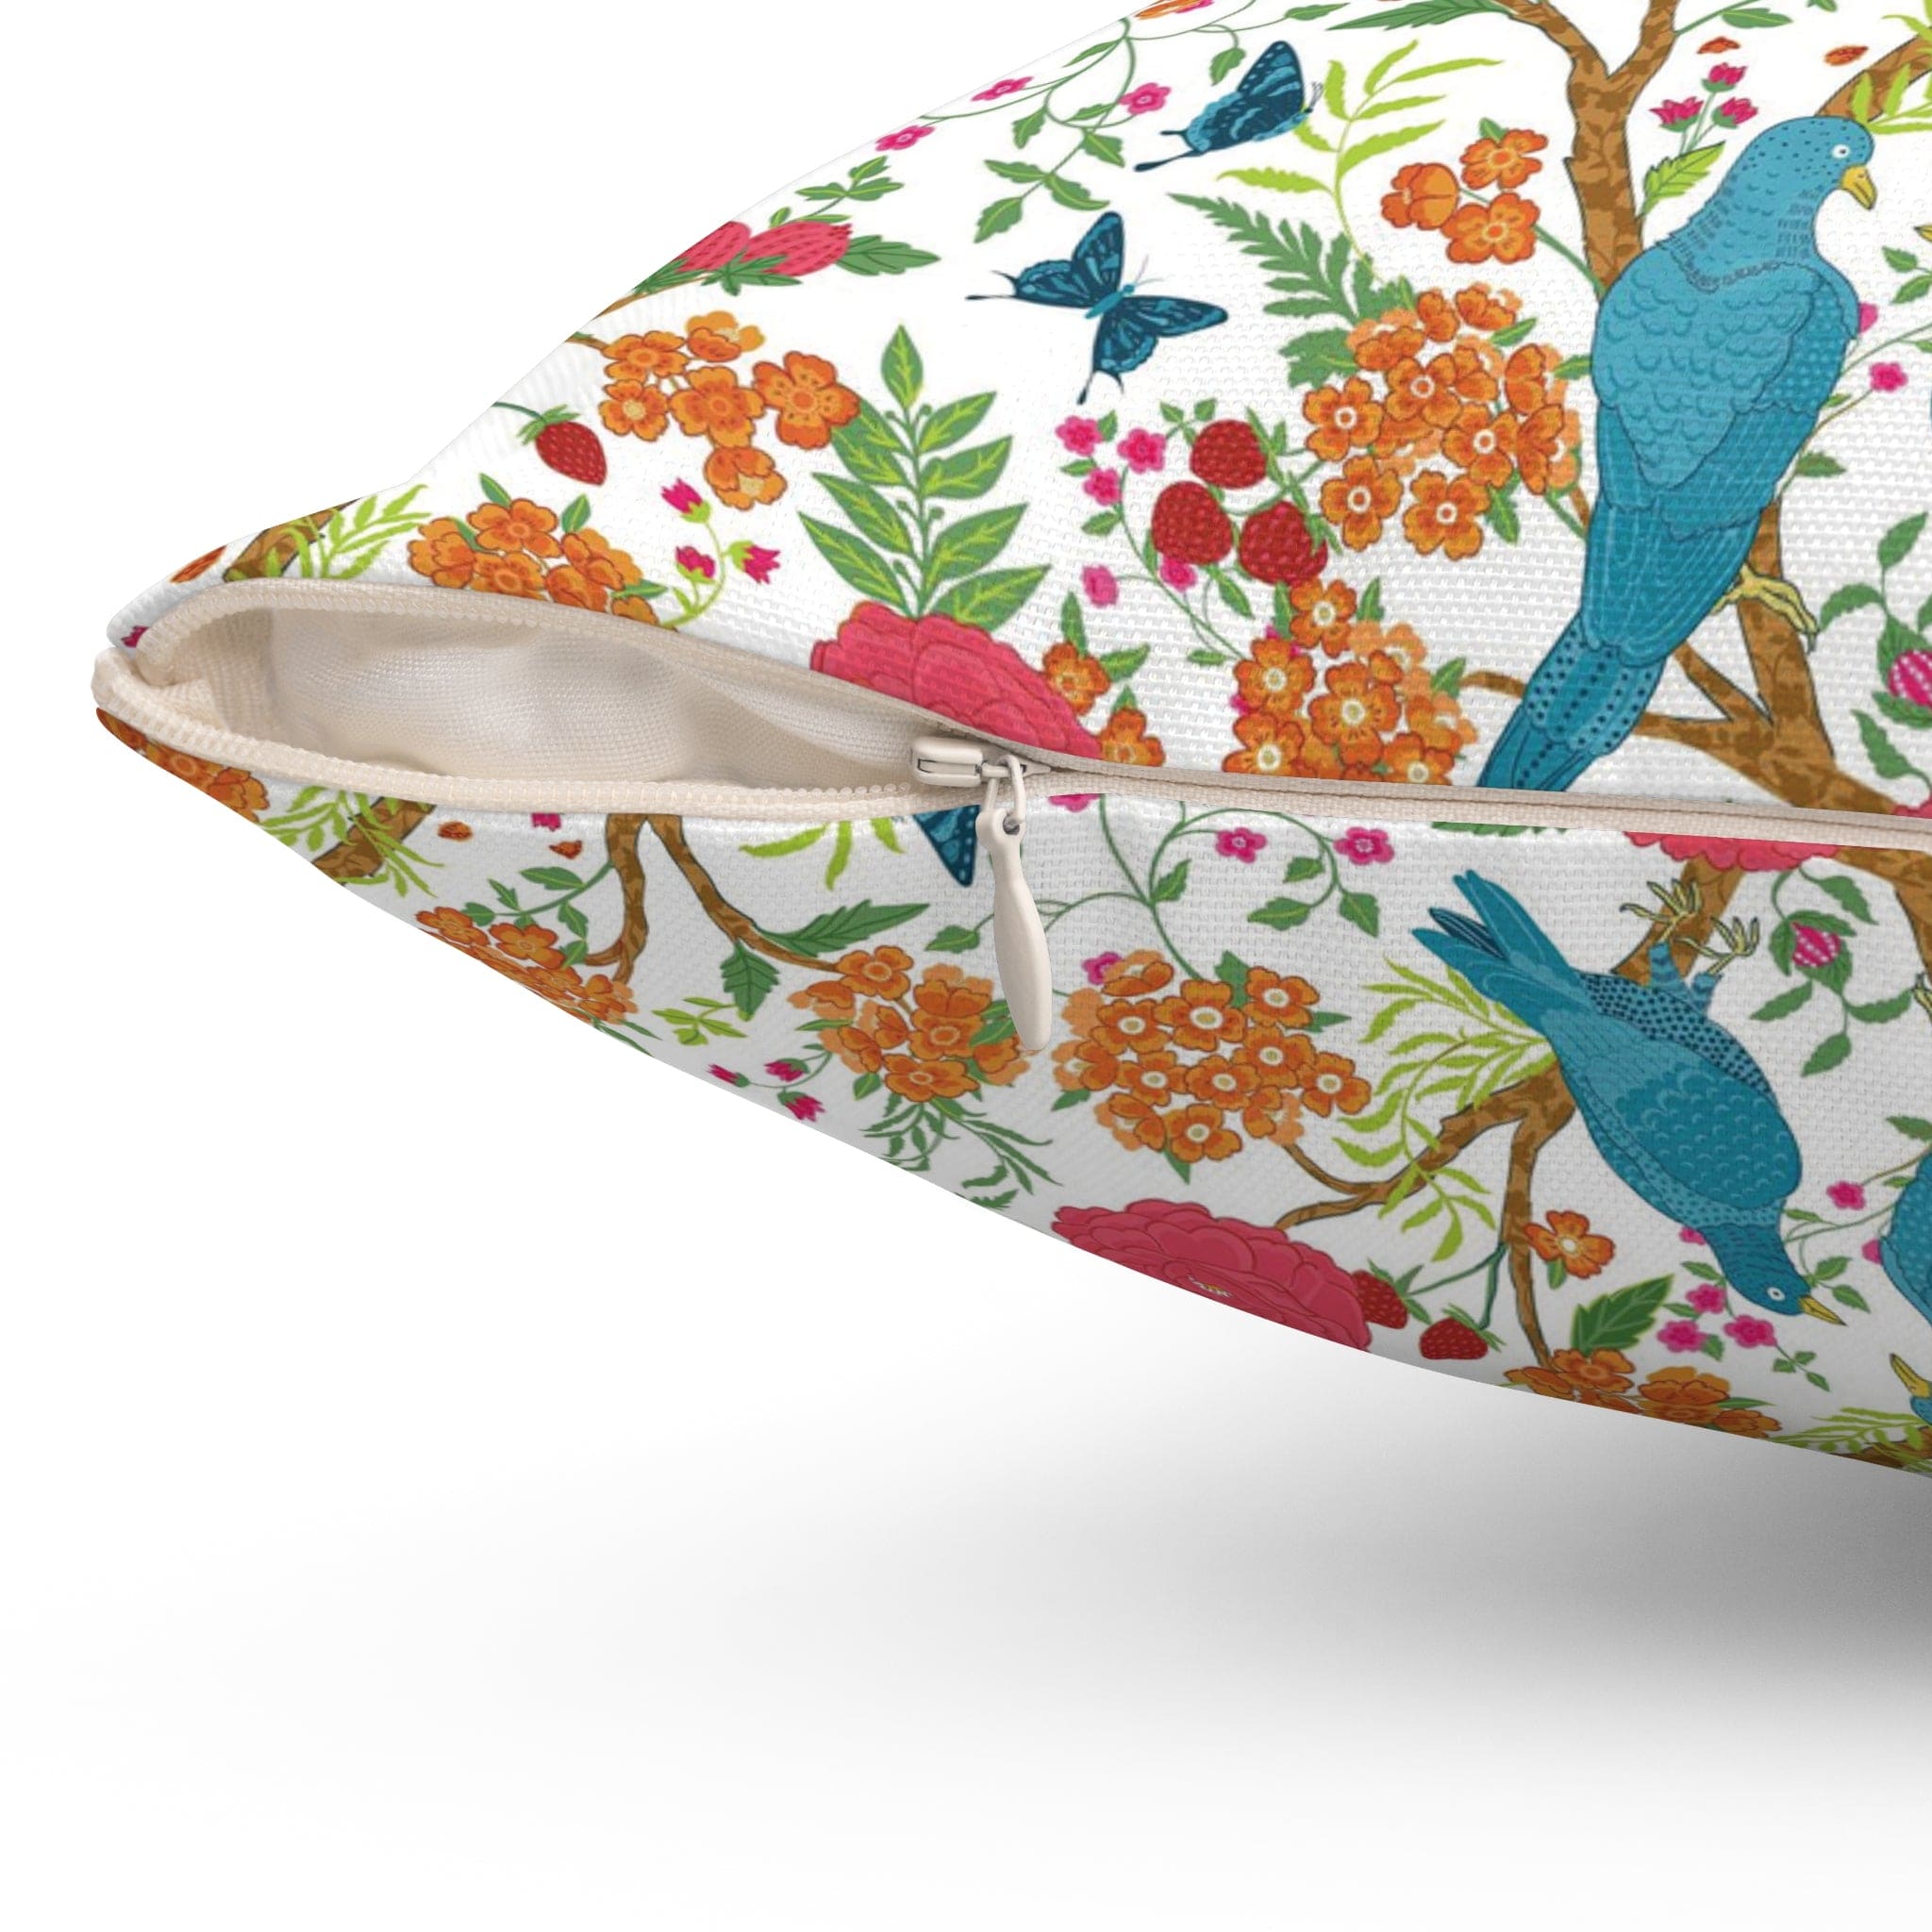 Kate McEnroe New York Chinoiserie Tropical Bird Garden Pillow with Insert, Floral Cushion, Botanical Bird Throw Pillow KM13809924Throw Pillows19410426217914575606